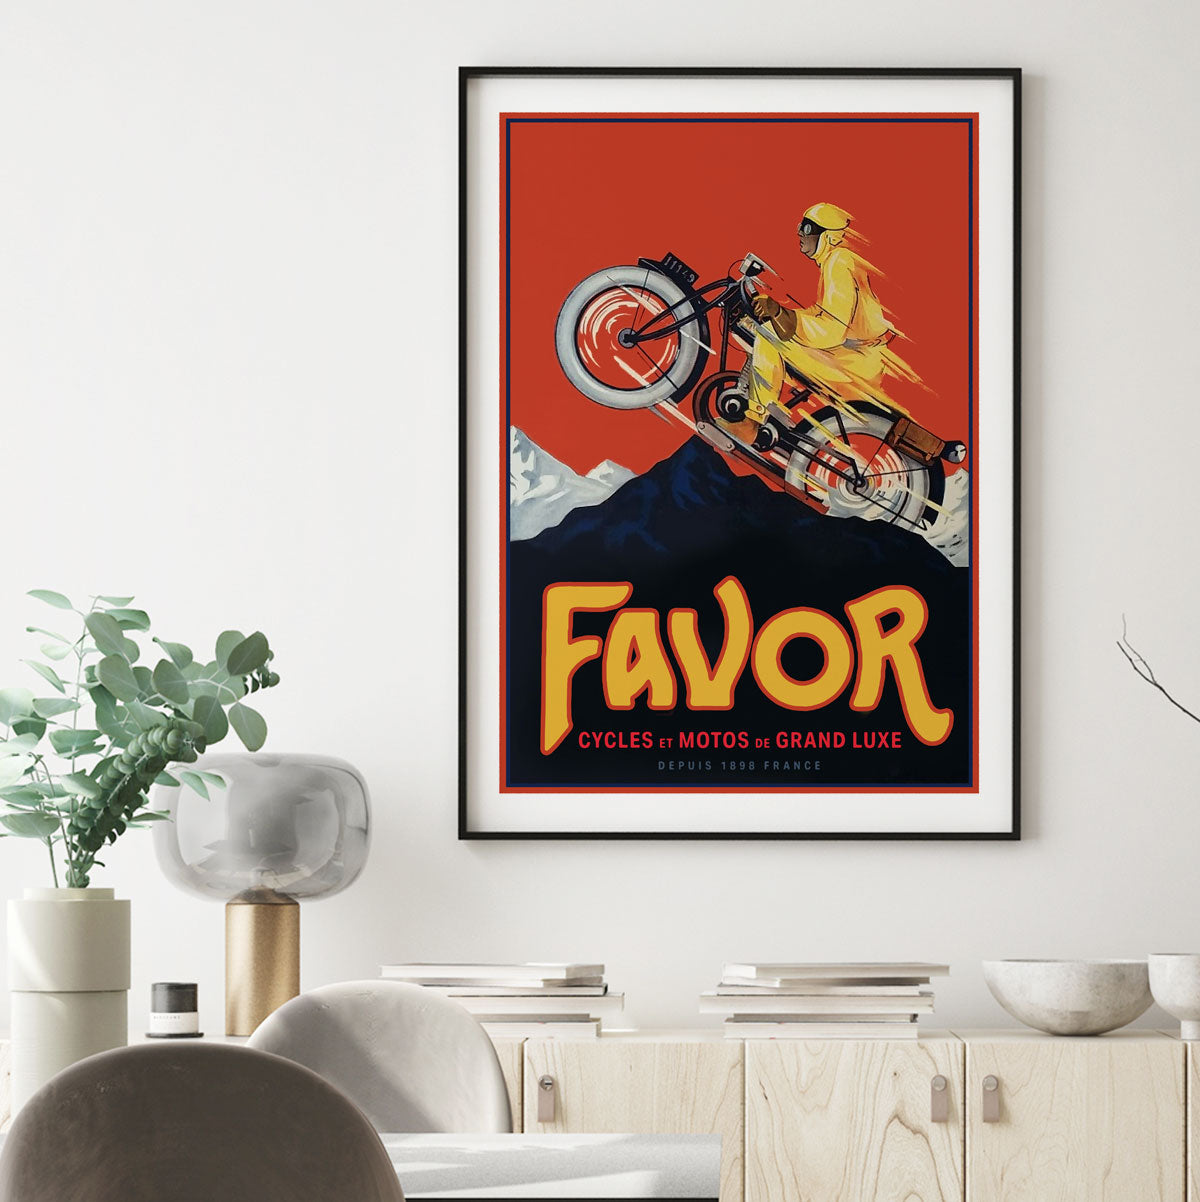 Favor France retro vintage poster from Places We Luv